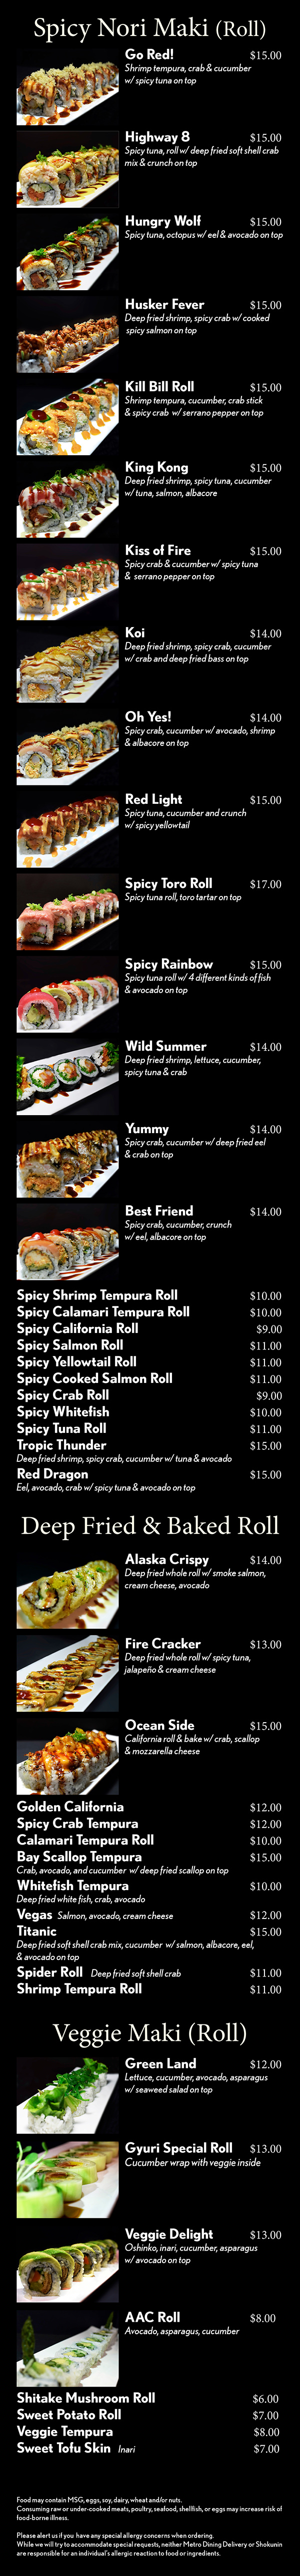 Deep Fried Roll




Golden Cali					$10
Vegas  Salmon, avocado, cream cheese	$10
Spicy Crab Tempura			$12
Veggie Tempura				$10
Lobster Tempura			$14
Spicy Roll
Spicy Tuna Roll				  $8
Spicy Albacore Roll			  $8
Spicy Salmon Roll			  $8
Spicy Scallop Roll			  $9
Spicy Crab Roll				  $8
Spicy Yellowtail Roll			  $8
Red Light					$12
Spicy tuna, cucumber and crunch 
w/ spicy yellowtail
Kill Bill Roll					$12
Shrimp tempura, cucumber, crab stick 
and spicy crab w/ serrano pepper on top
Spicy Fish Salad				$13
Crab, cucumber and avocado 
w/ spicy fish salad on top
Go! Red						$13
Shrimp tempura, crab and cucumber 
w/ spicy tuna on top
Kiss of Fire					$13
Spicy crab and cucumber w/ spicy tuna 
and serrano pepper on top
Shokunin Spicy Toto Tartar	$16
Spicy tuna, crab and cucumber w/
chopped blue fin tuna on top
Hand Roll (Temaki)




Spicy Tuna					  $5
Spicy Salmon				  $5
Spicy Yellowtail				  $5
Spicy Scallop			  	  $6
Spicy Crab					  $5
Spicy Toro				  	  $7
California					  $5
Veggie						  $5
Negi Toro					  $7
Negi Hama					  $5
Shrimp Tempura				  $5
Smoke Salmon				  $5
Eel & Avocado 				  $5
Salmon & Avocado			  $5
Tuna & Avocado				  $5
Salmon Skin					  $5


Food may contain MSG, eggs, soy, dairy, wheat and/or nuts.
Consuming raw or under-cooked meats, poultry, seafood, shellfish, or eggs may increase risk of food-borne illness.

Please alert us if you  have any special allergy concerns when ordering.
While we will try to accommodate special requests, neither Metro Dining Delivery or Shokunin are responsible for an individual’s allergic reaction to food or ingredients.